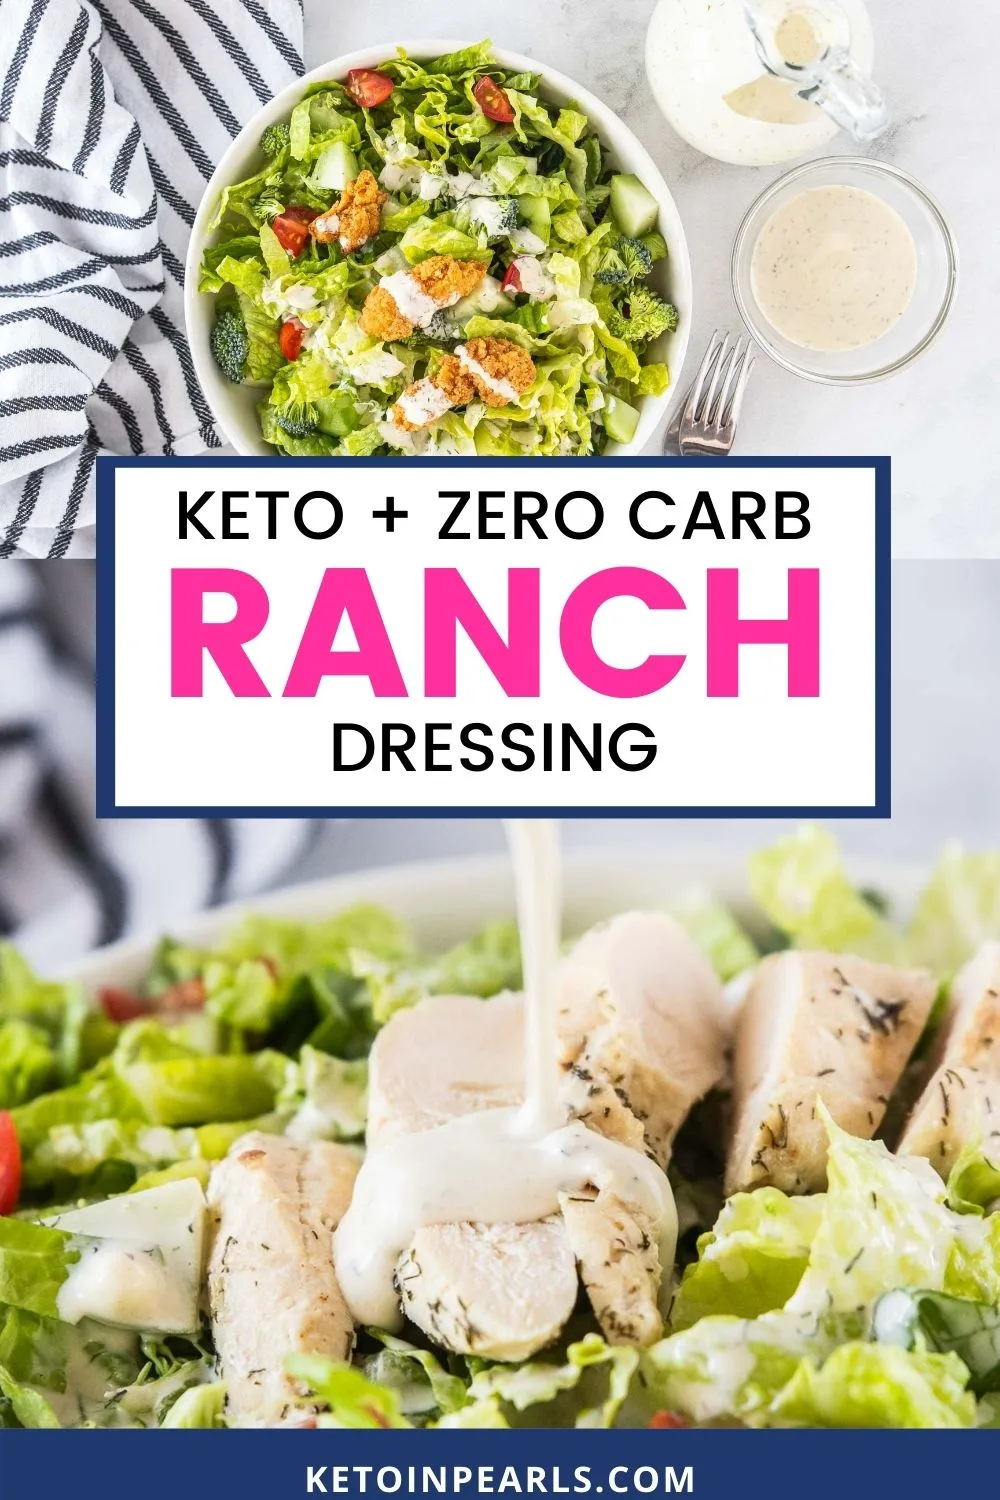 Ditch the preservative filled dressings and skip the expensive organic dressings by making this easy homemade keto ranch dressing recipe! With only 4 ingredients, you can make an entire batch of zero carb ranch dressing that's dairy free, paleo, and Whole30 approved.